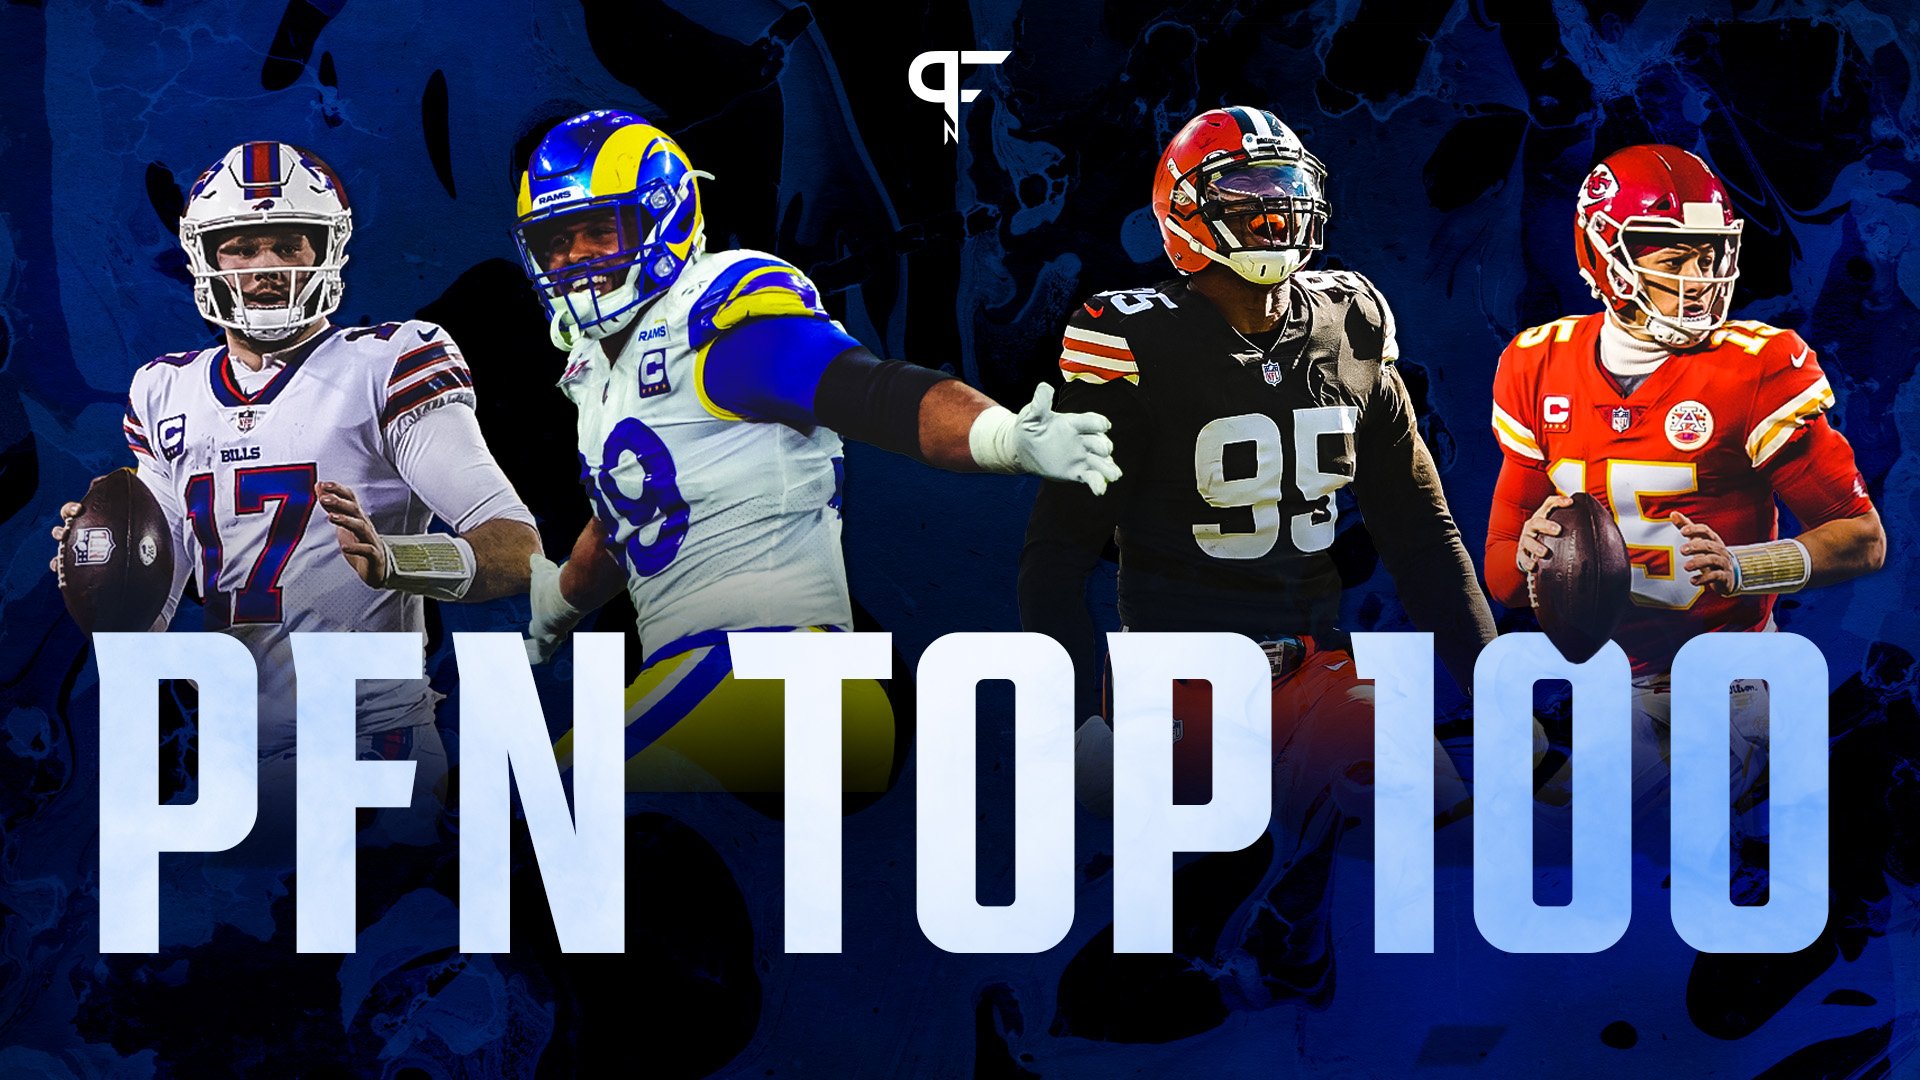 nfl top 100 players